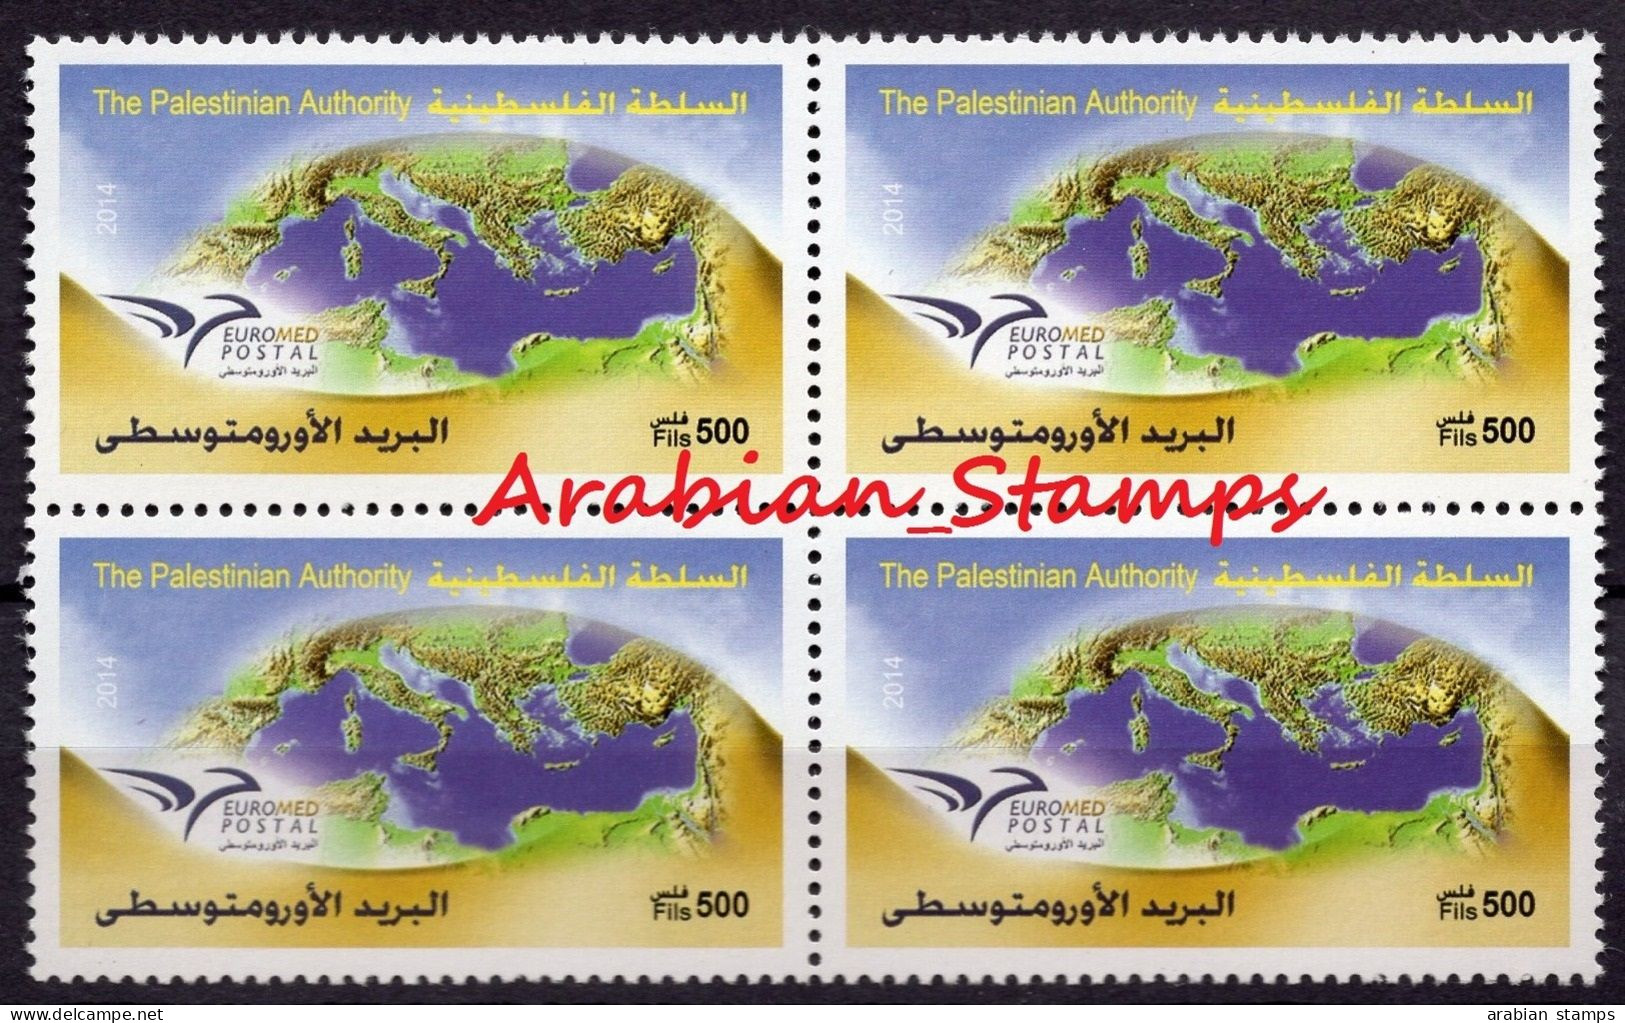 PALESTINE PALESTINIAN AUTHORITY 2014 JOINT ISSUE EUROMED POSTAL EURO MED LEBANON JORDAN MALTA GREECE CYPRUS SPAIN - Joint Issues